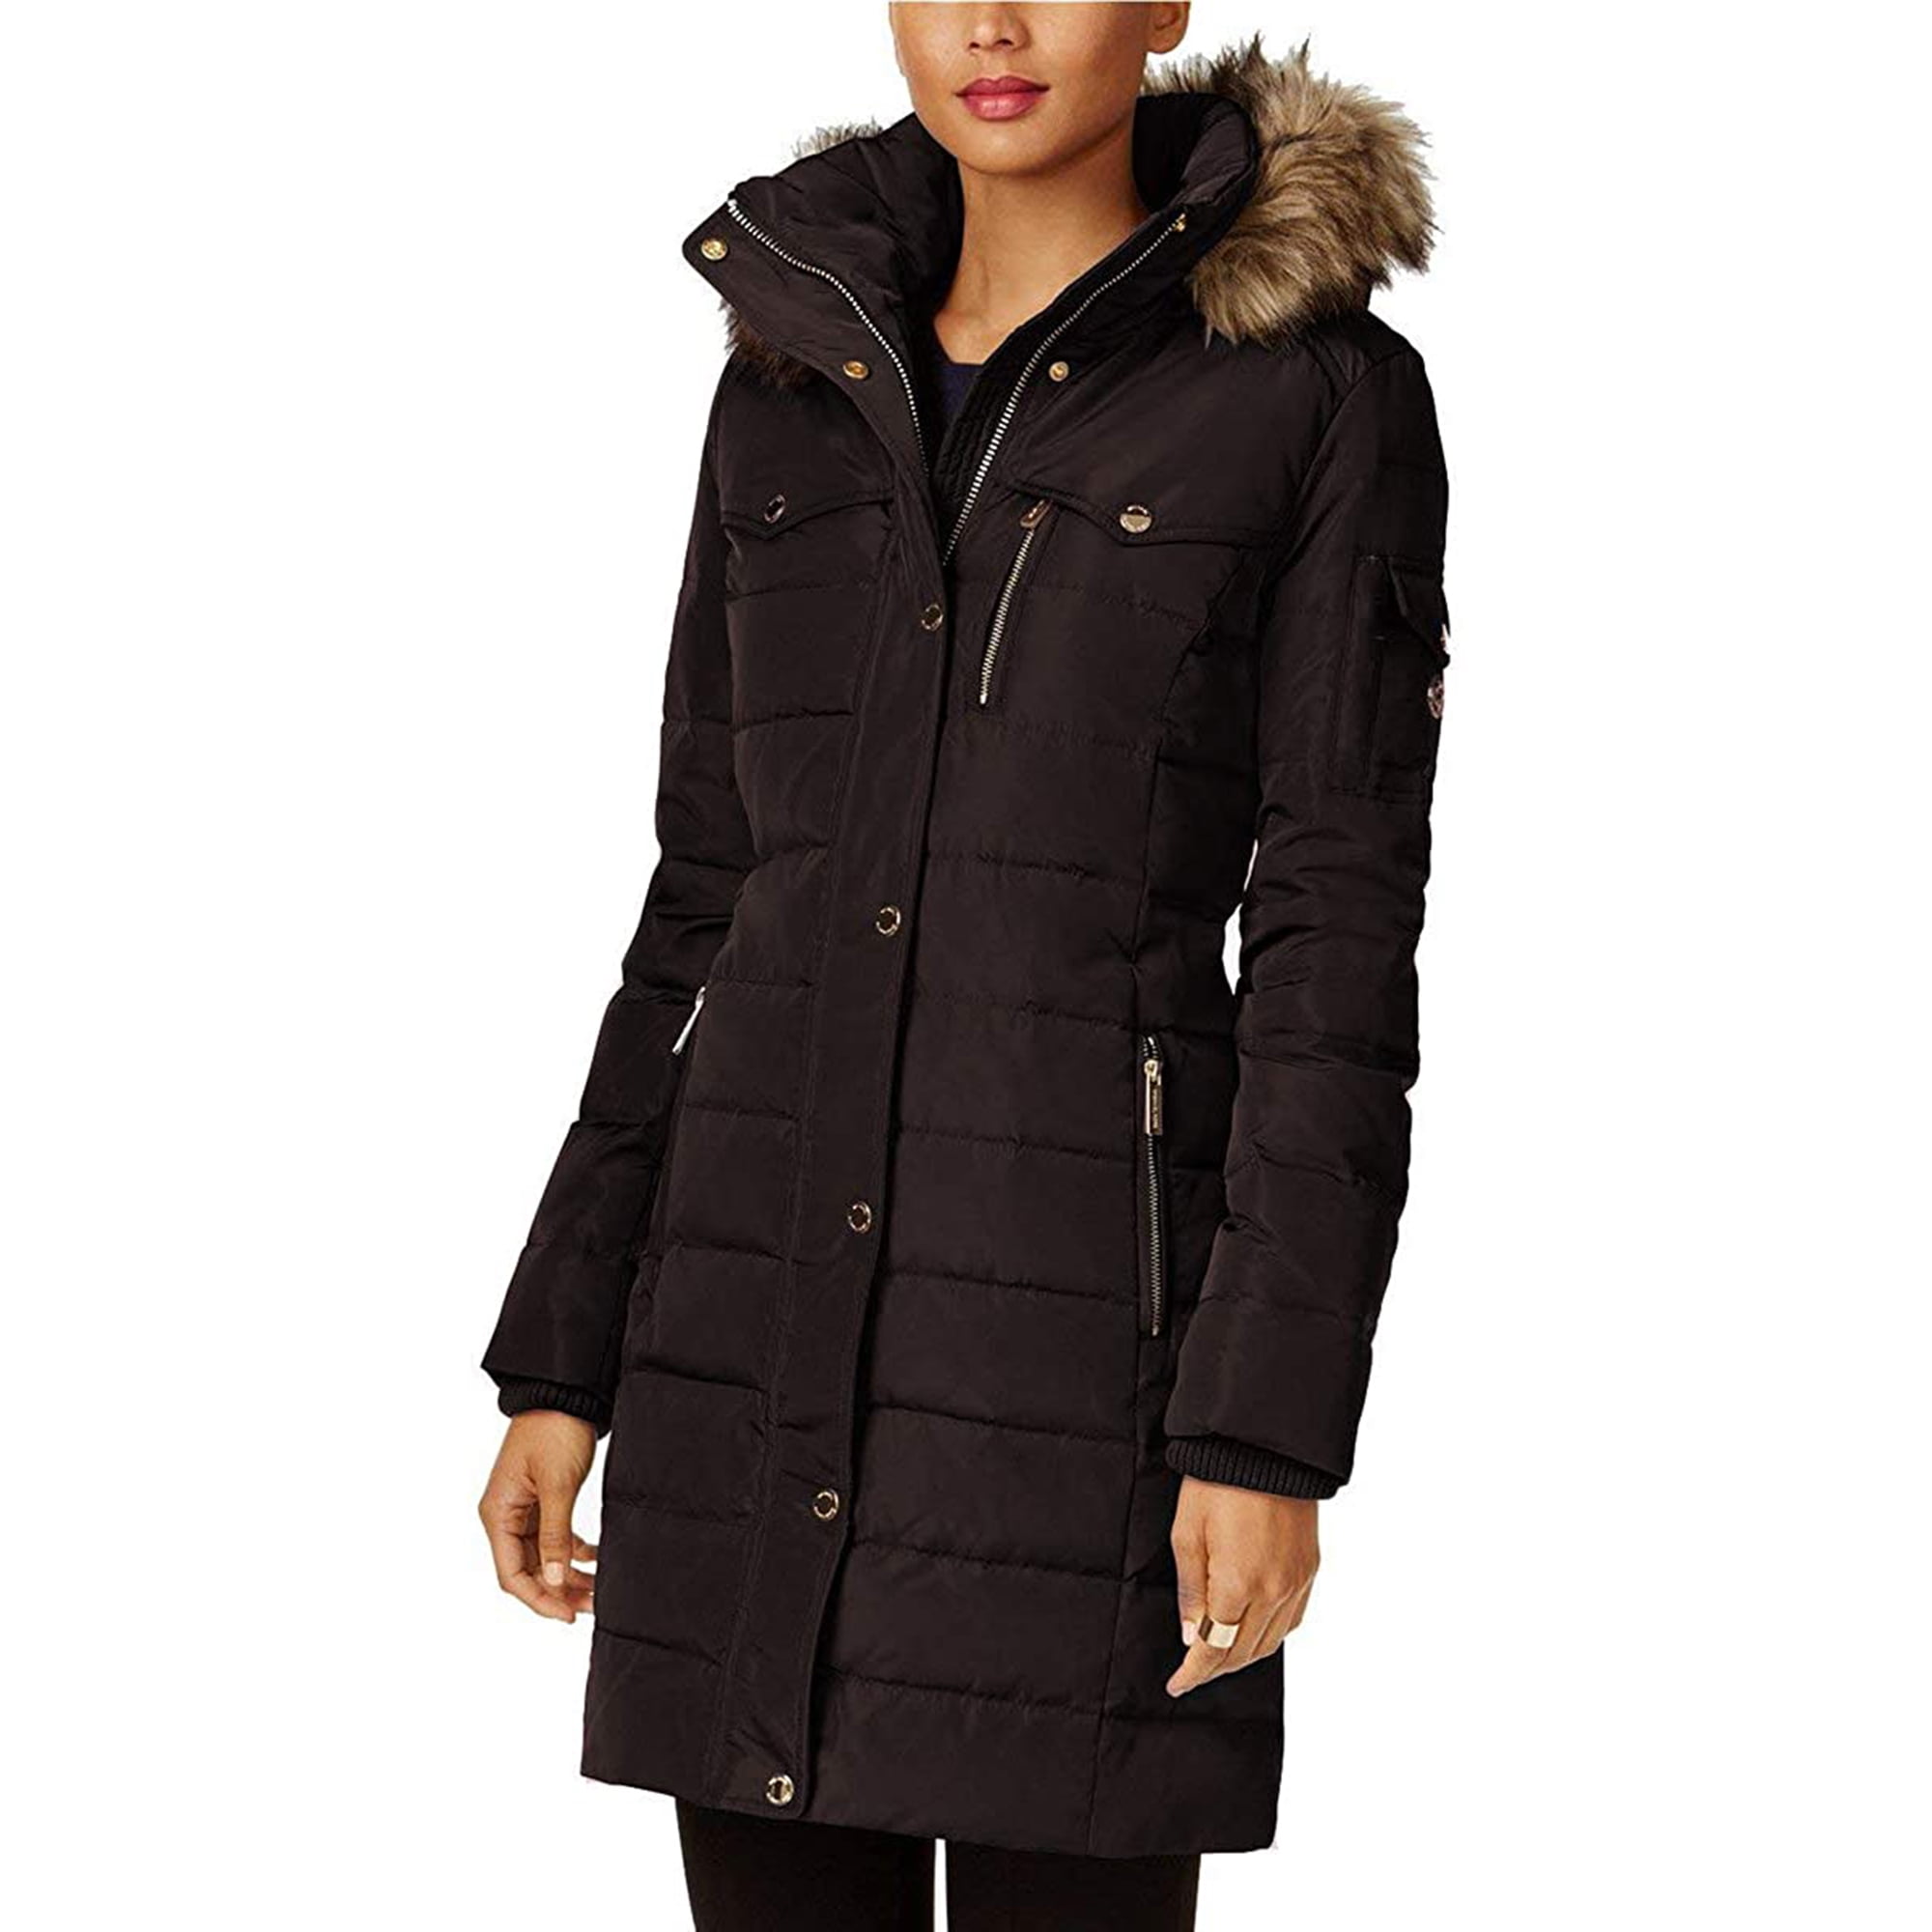 replacement hood for michael kors jacket